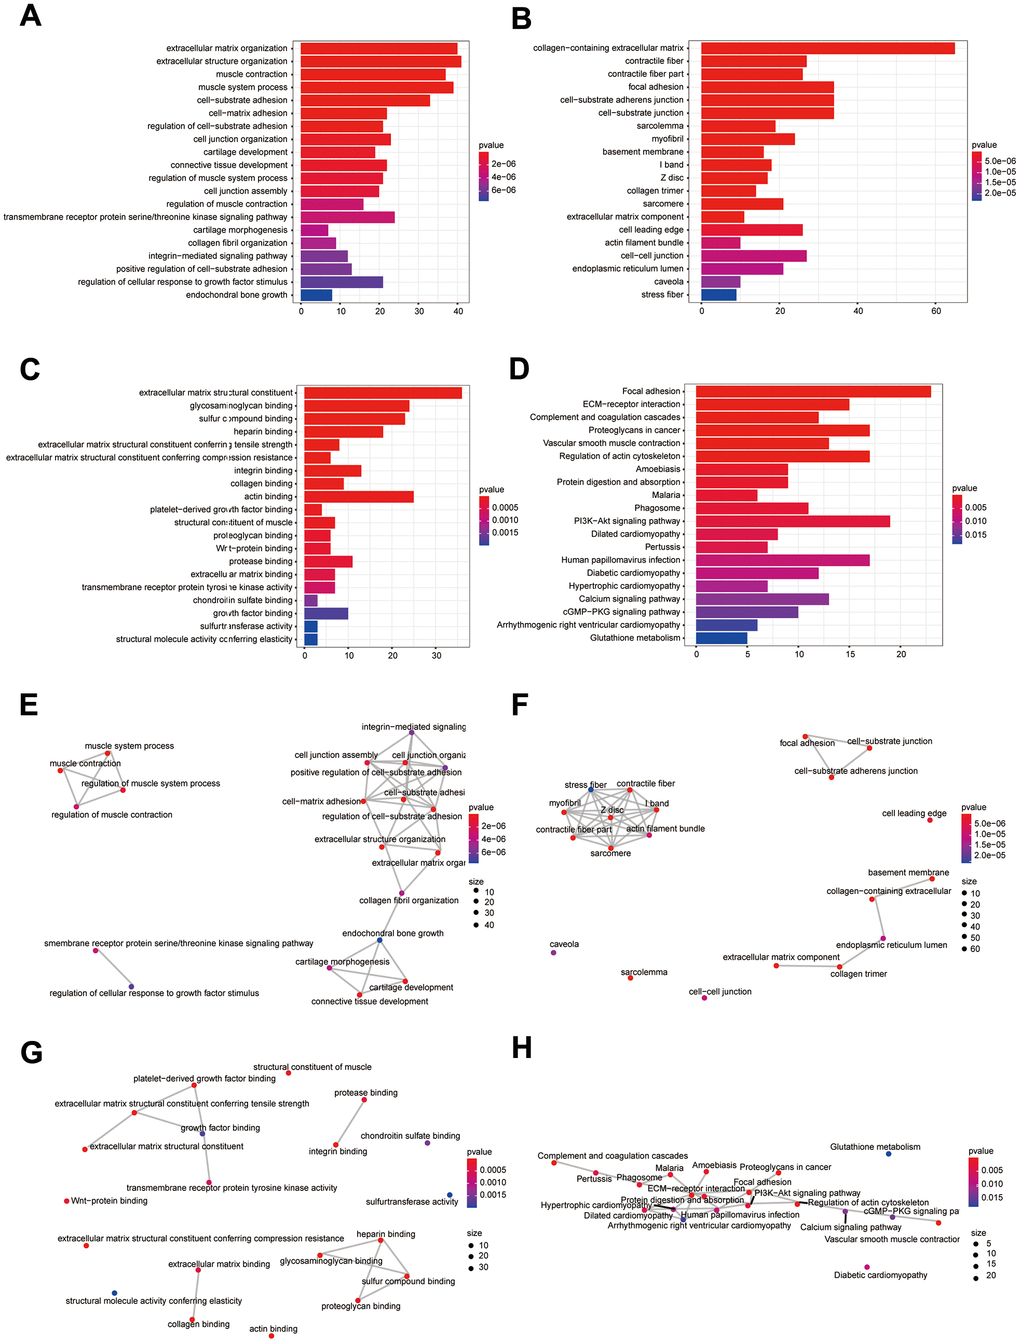 Bioinformatics analysis of DEIGRC. (A–D) Bar charts of BP, CC, MF, and KEGG enrichment analysis results; (E–H) Correlation analysis of the results from BP, CC, MF, and KEGG enrichment analysis.